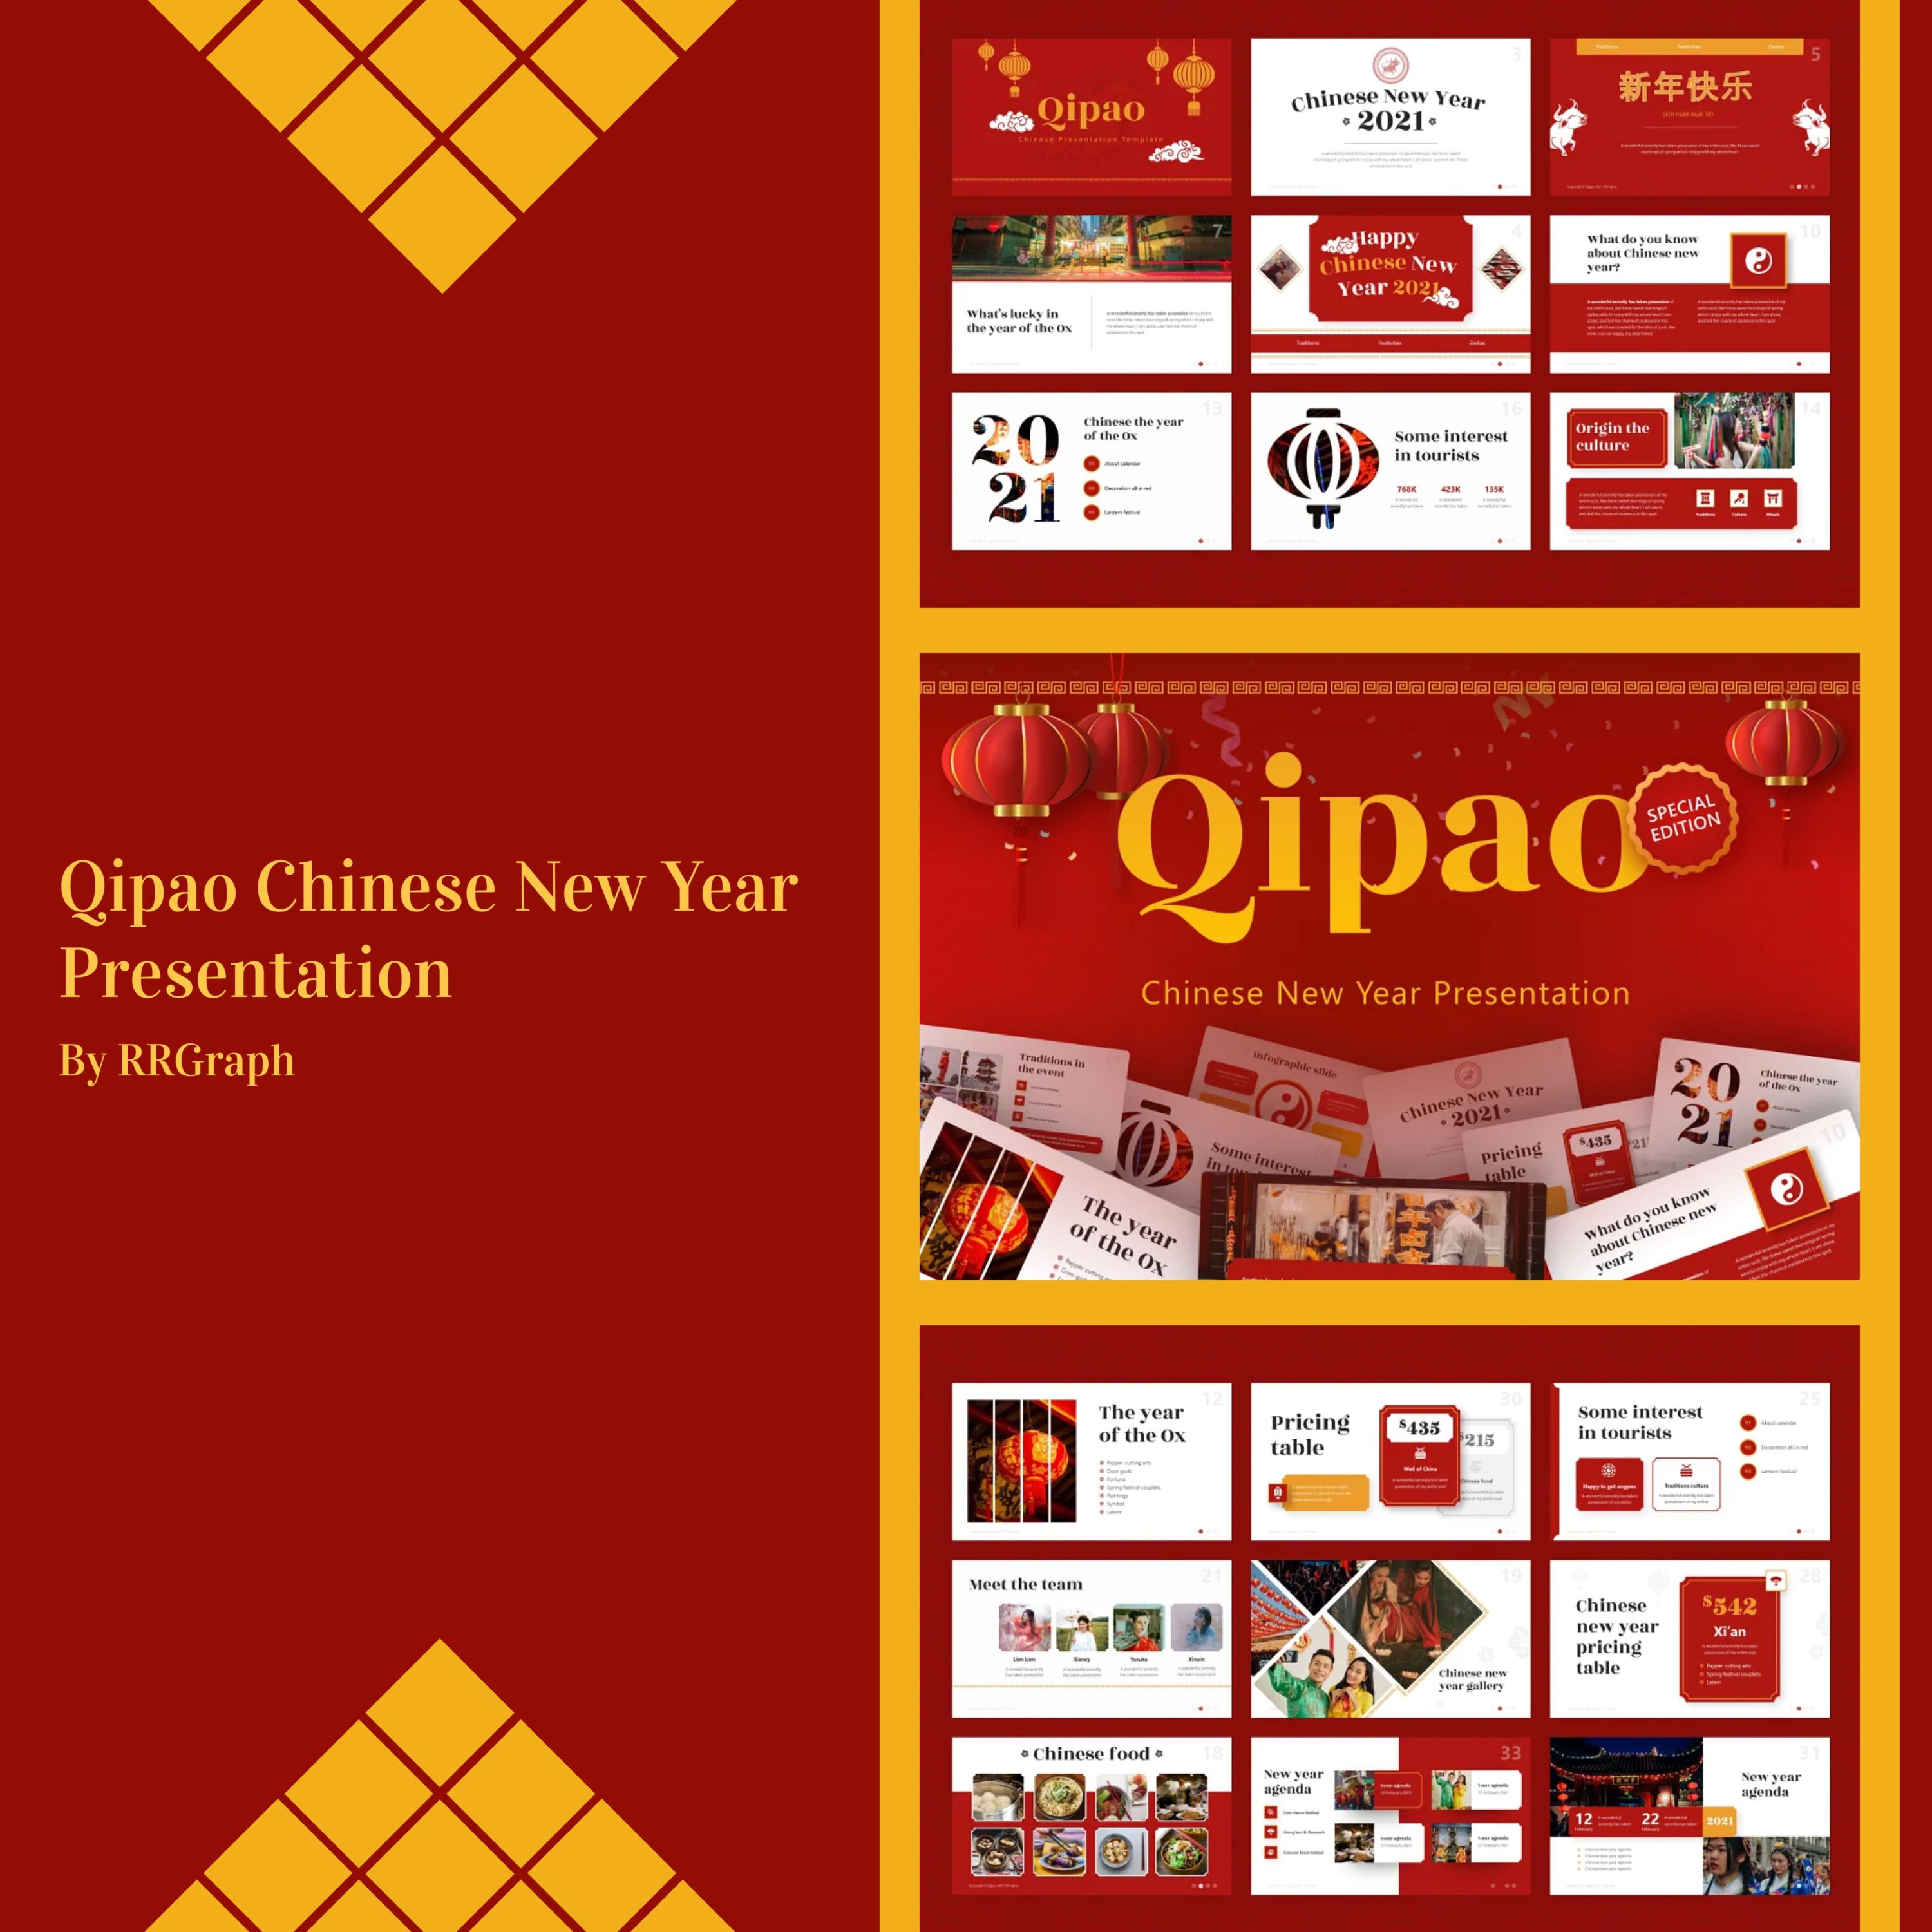 Qipao Chinese New Year Presentation cover.